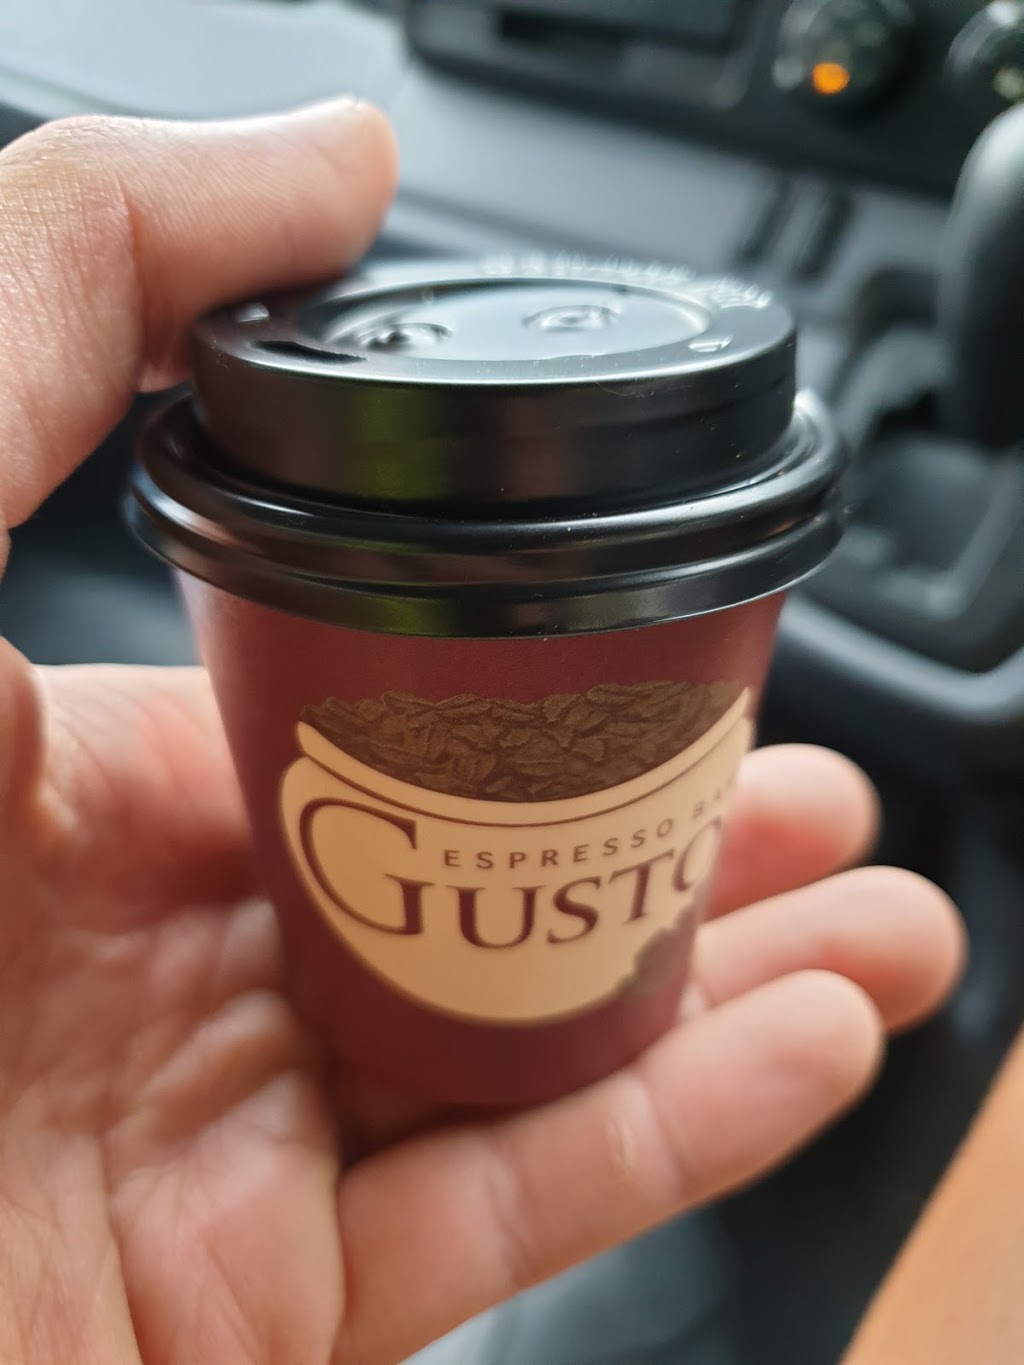 Gusto Espresso Bar | cafe | 211 Coogee Bay Rd, Coogee NSW 2034, Australia | 0293158963 OR +61 2 9315 8963